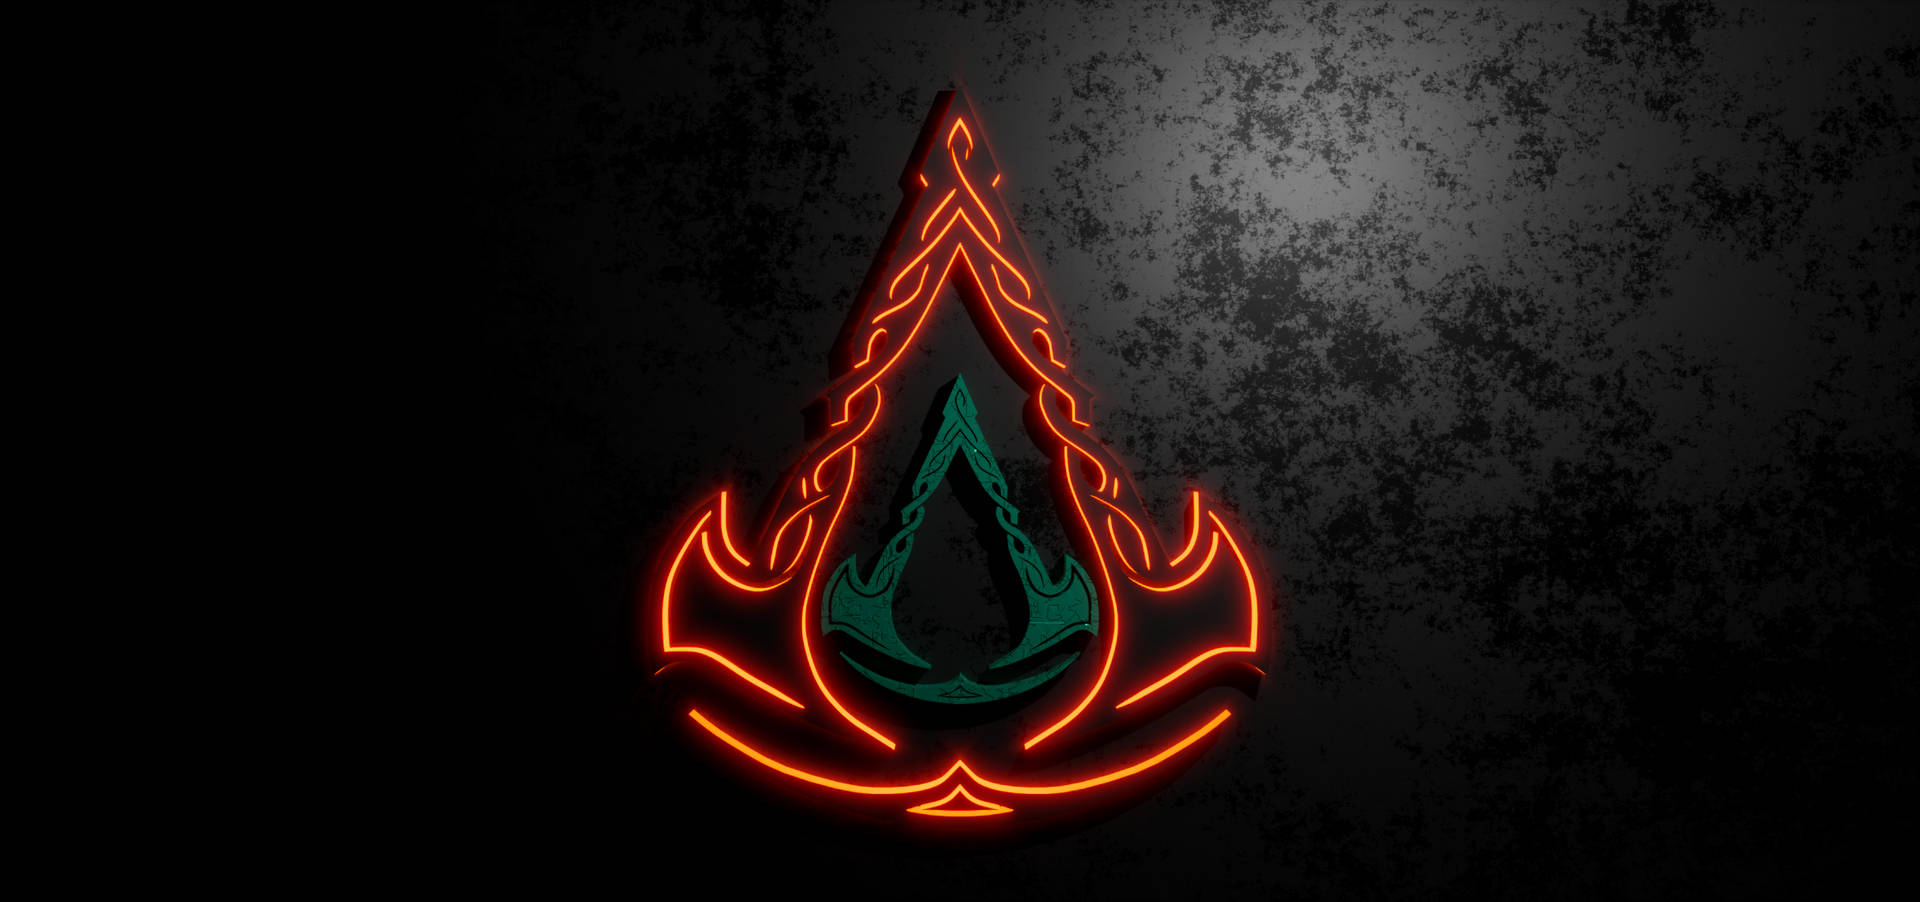 Assassin's Creed Valhalla Red Wallest Creed Background